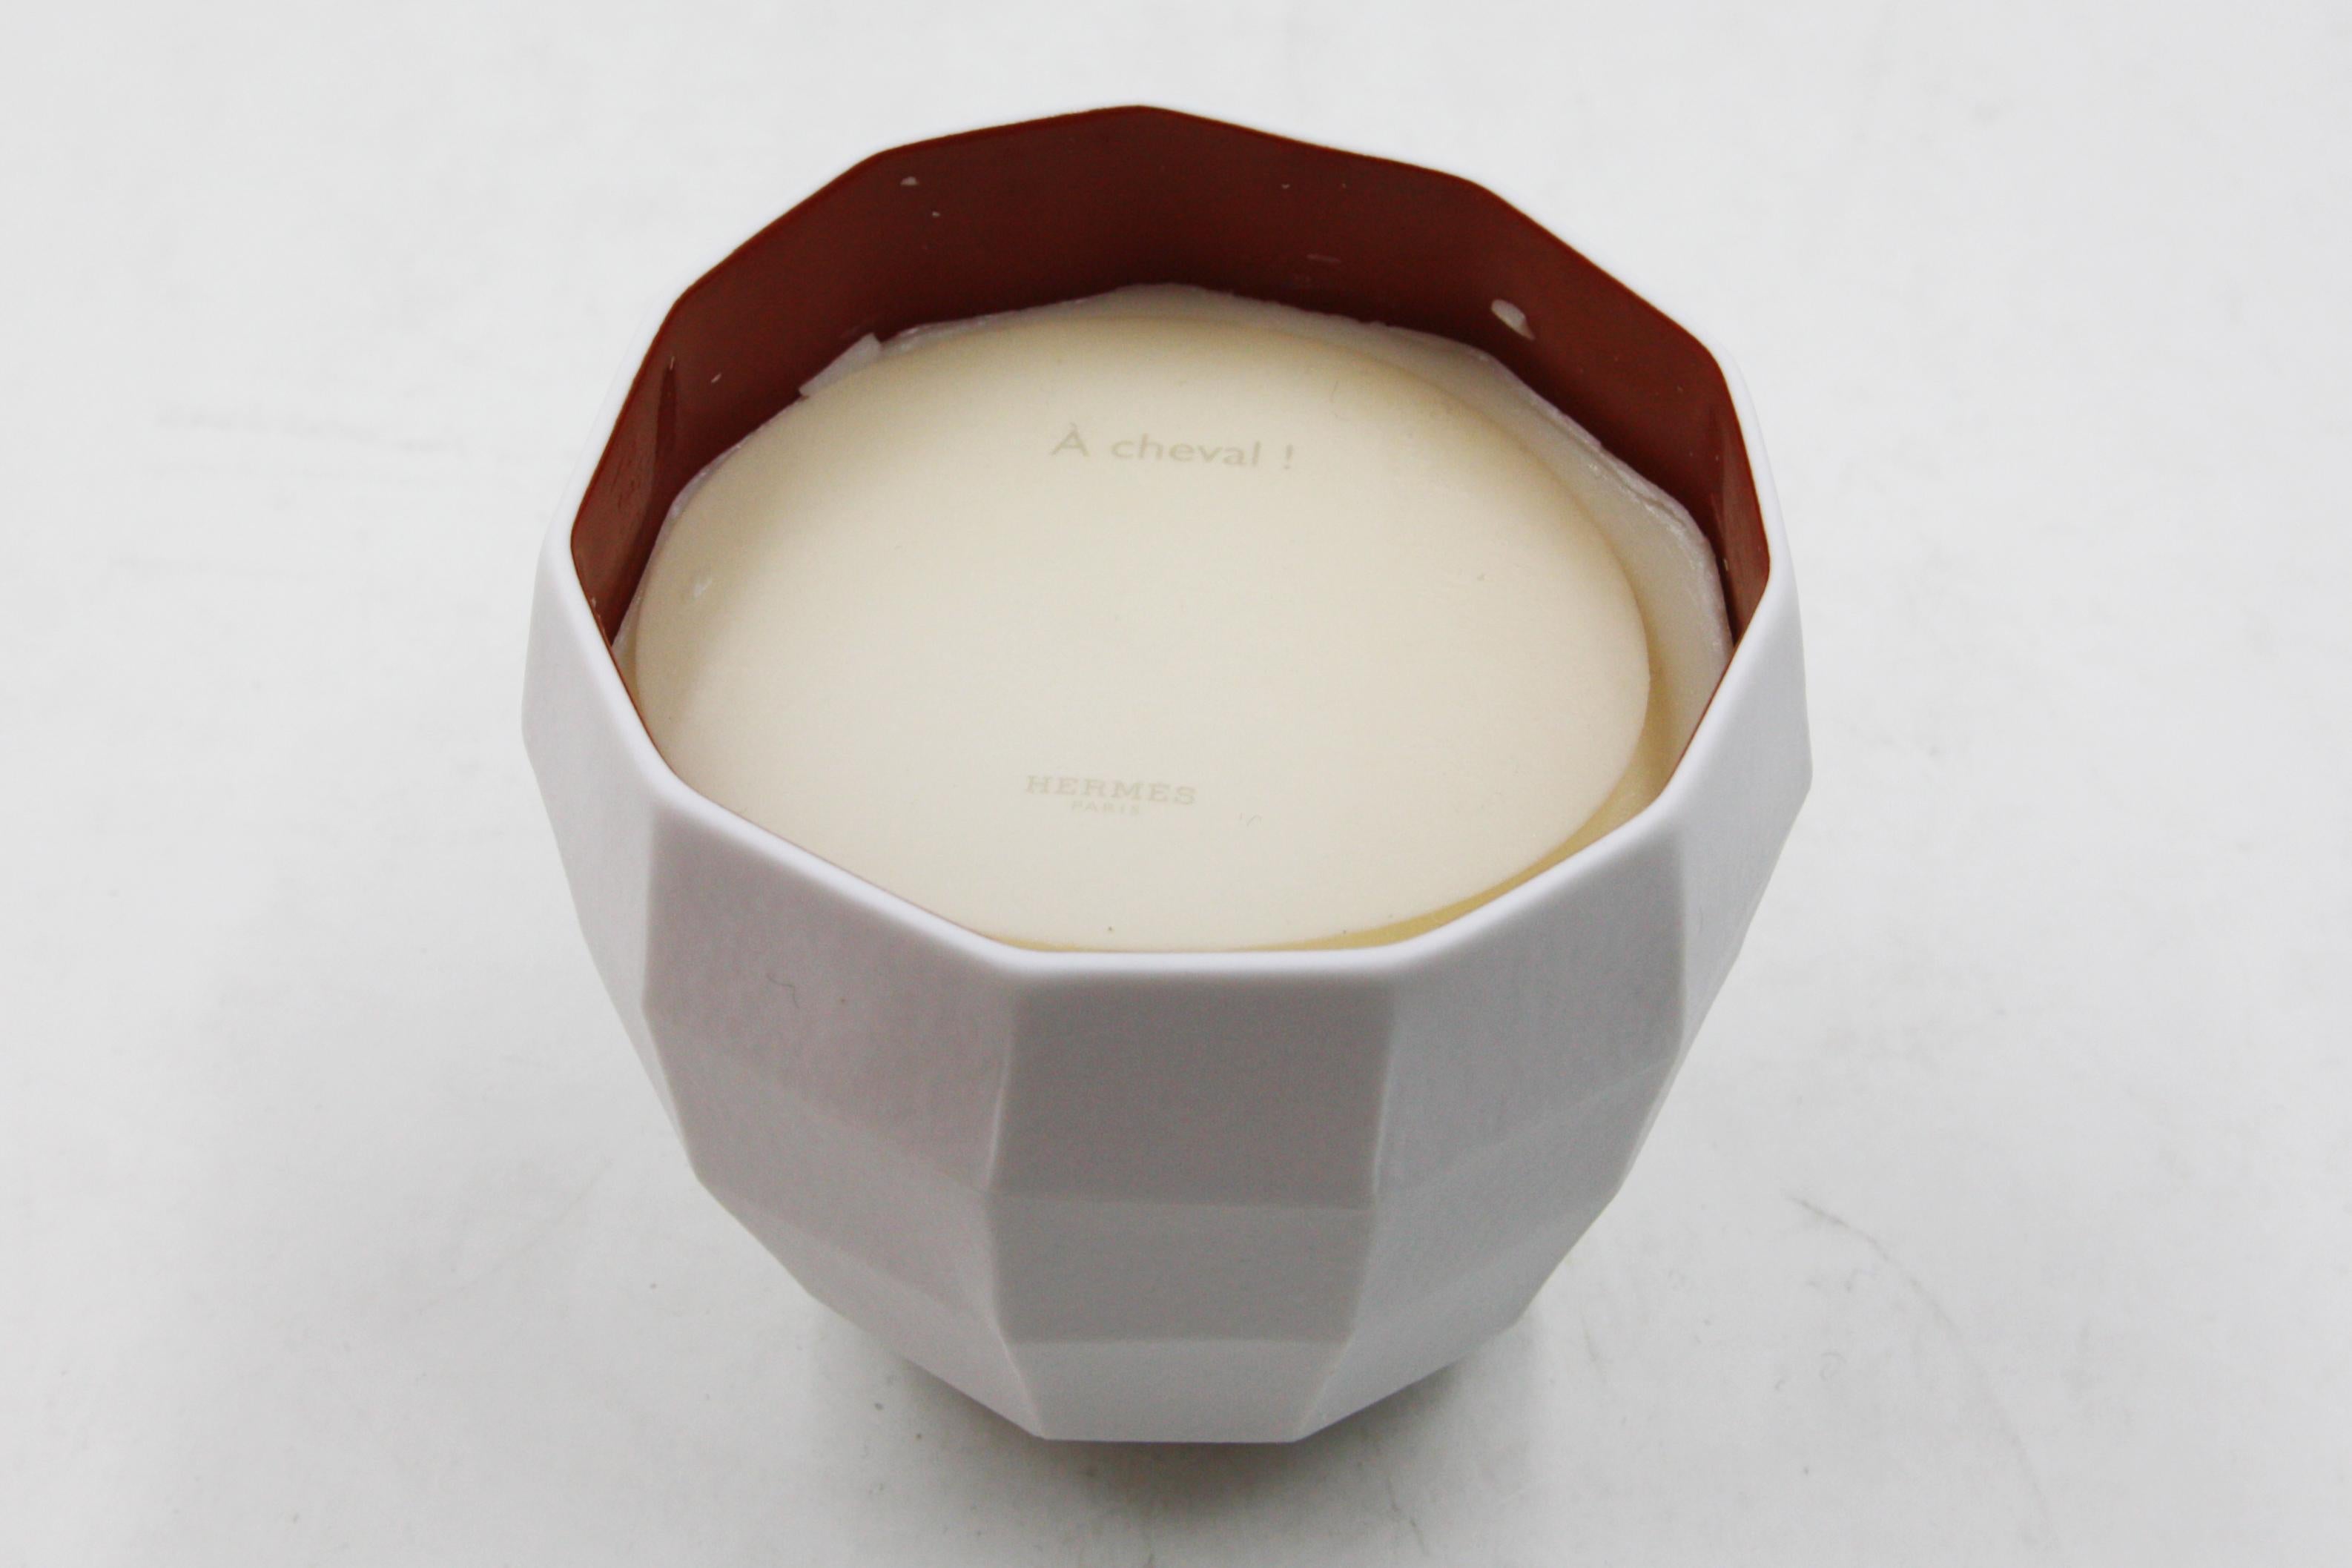 hermes candle price